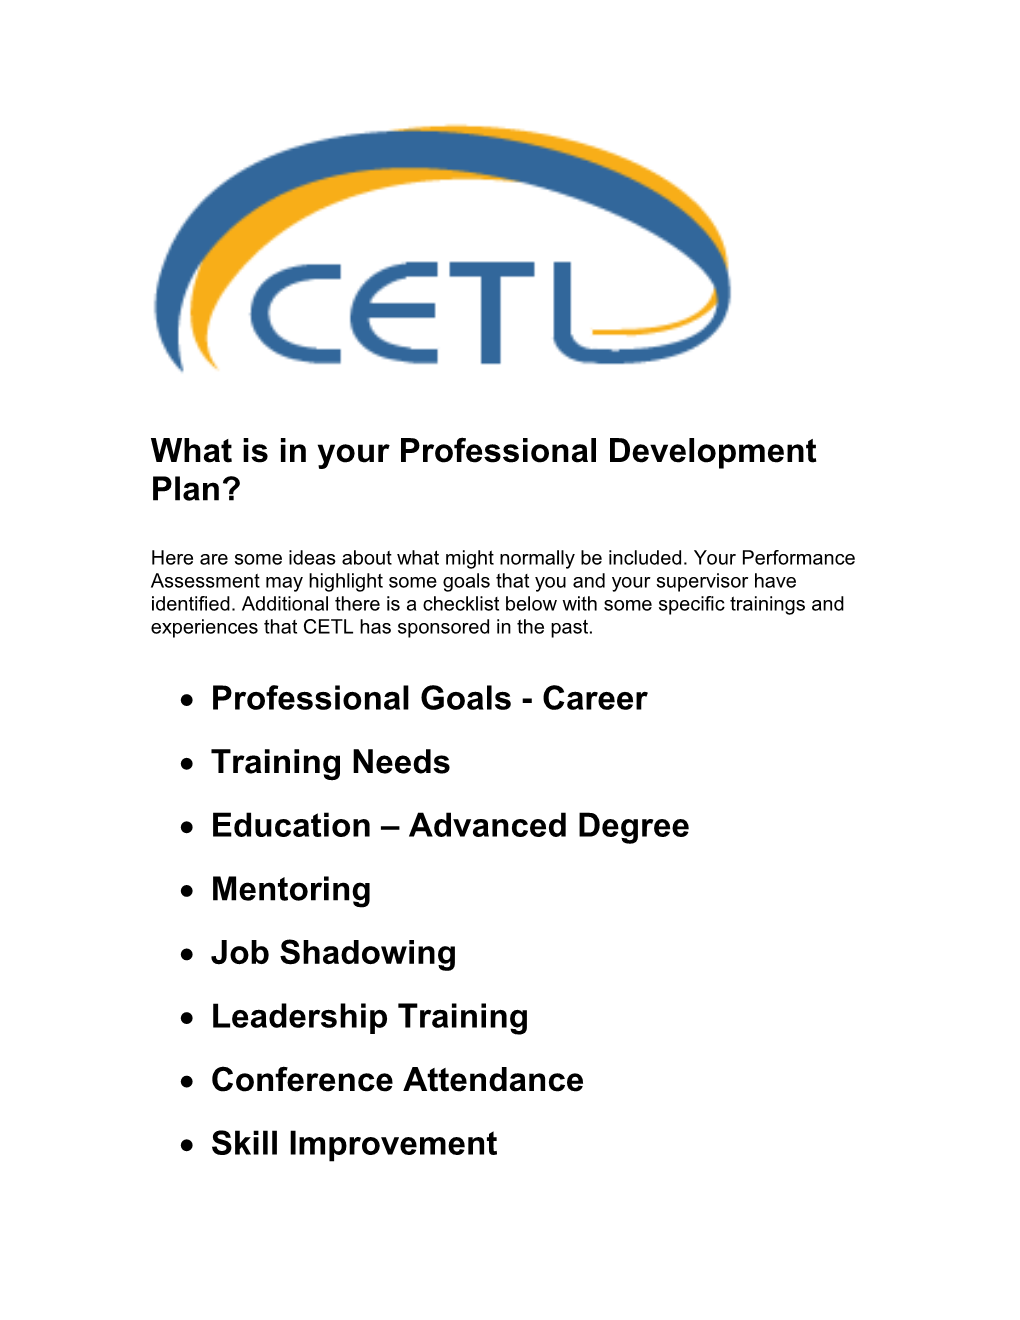 What Is in Your Professional Development Plan?